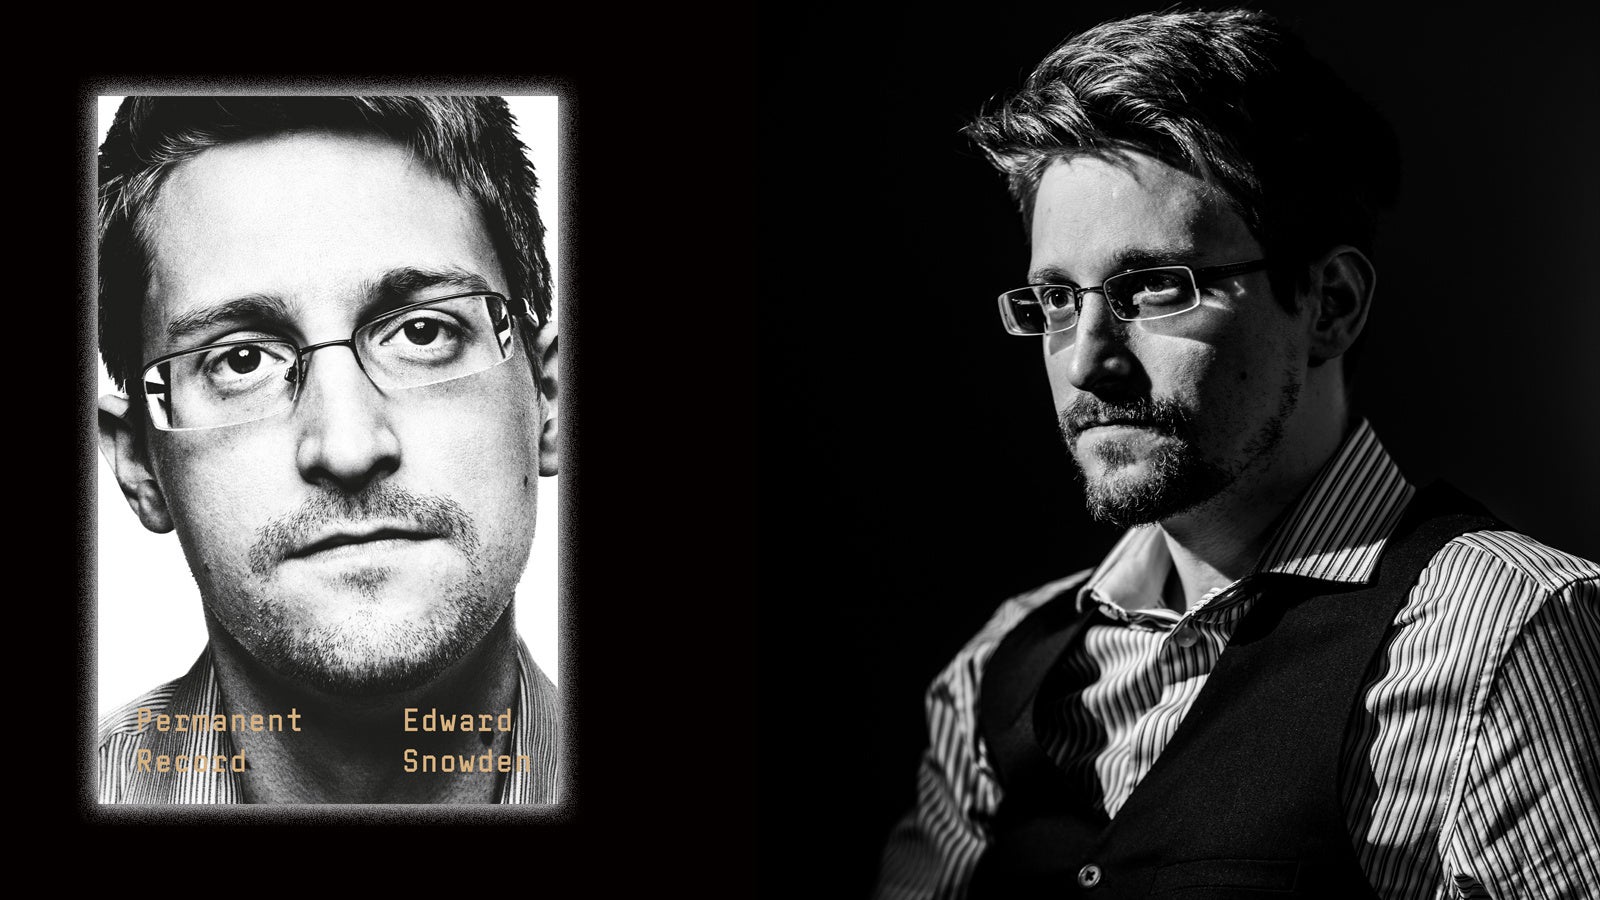 Image of Permanent Record book cover, next to image of Edward Snowden